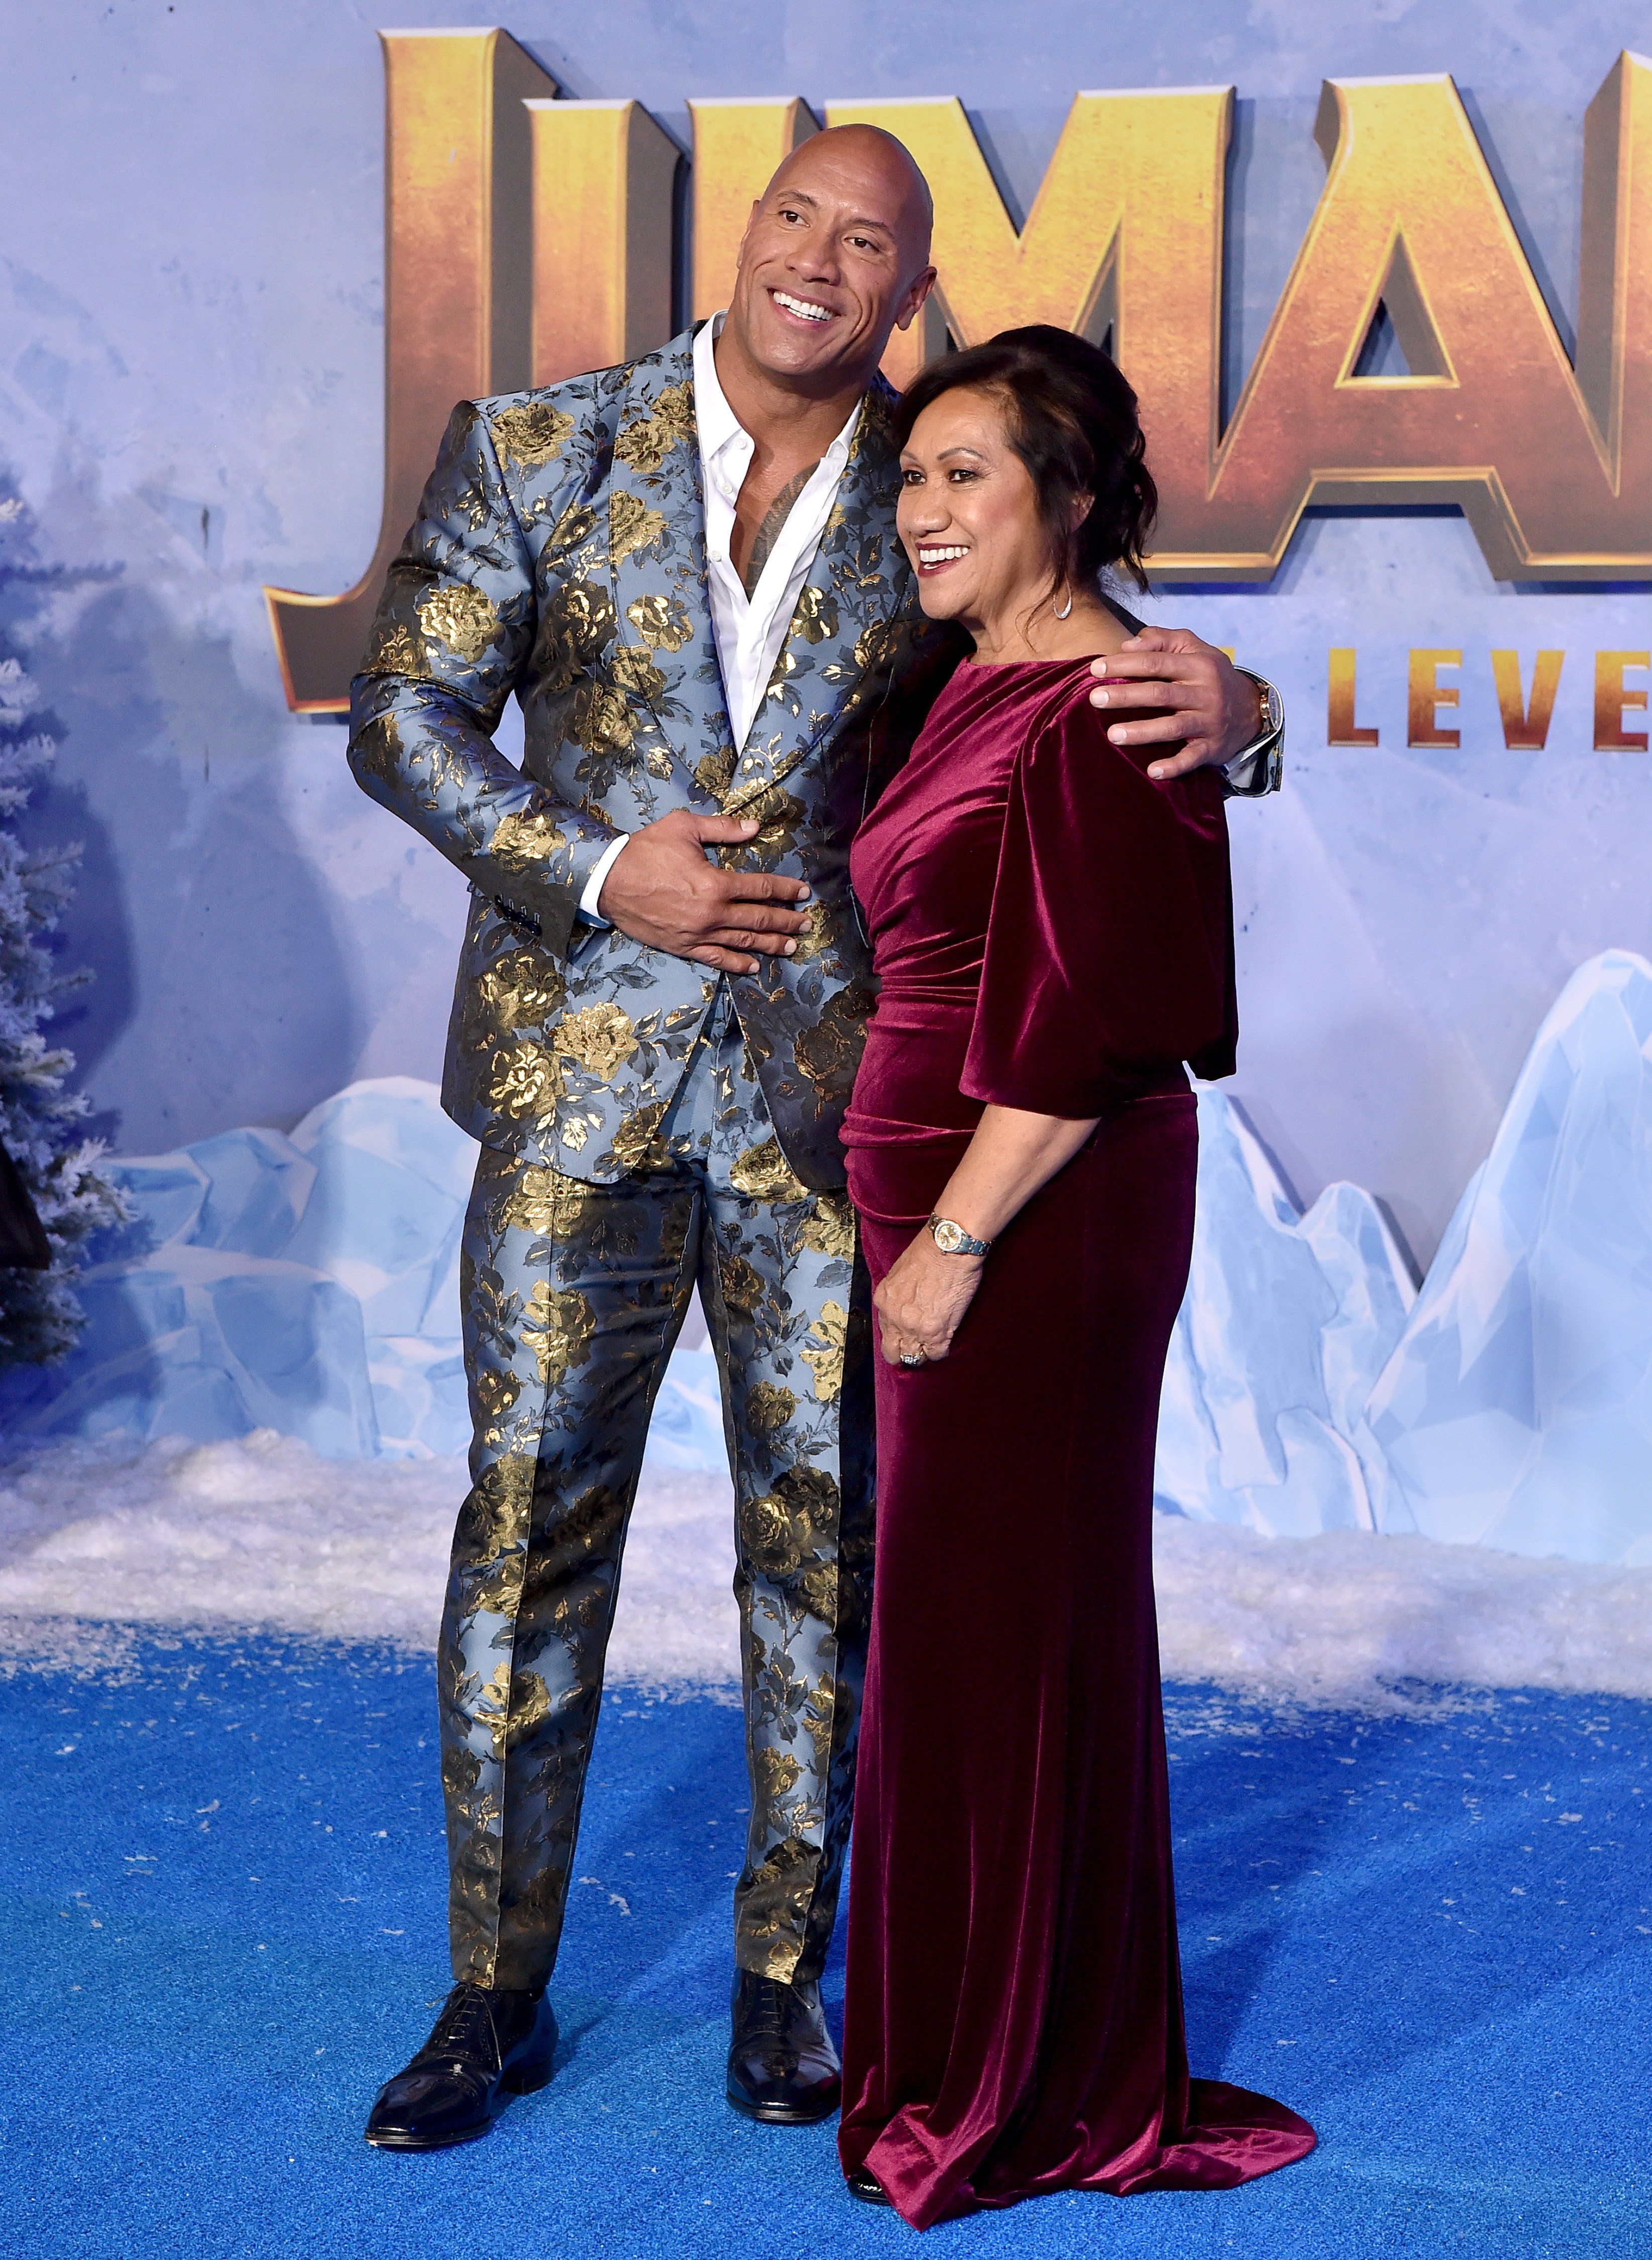 Dwayne Johnson and Ata Johnson attend the premiere of Sony Pictures' "Jumanji: The Next Level" on December 09, 2019 in Hollywood, California. | Source: Getty Images